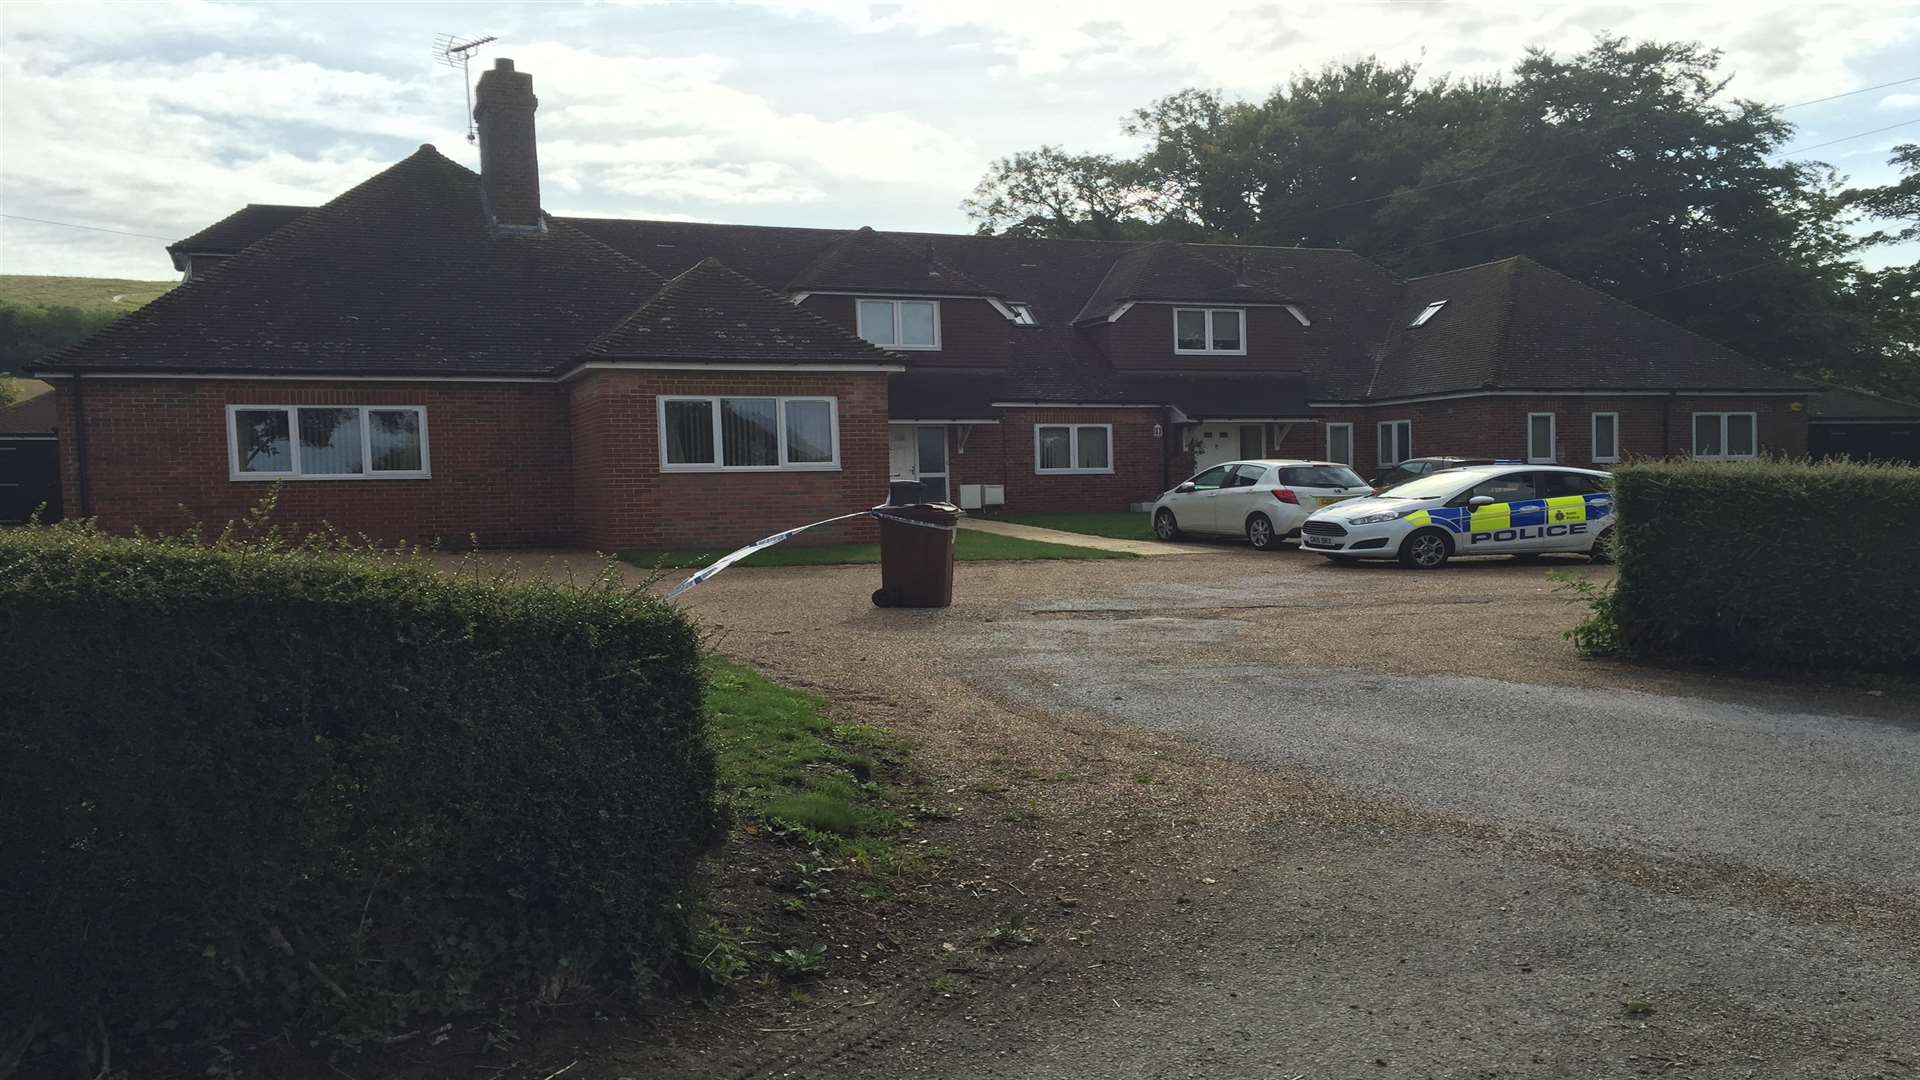 The house has been cordoned off with police tape